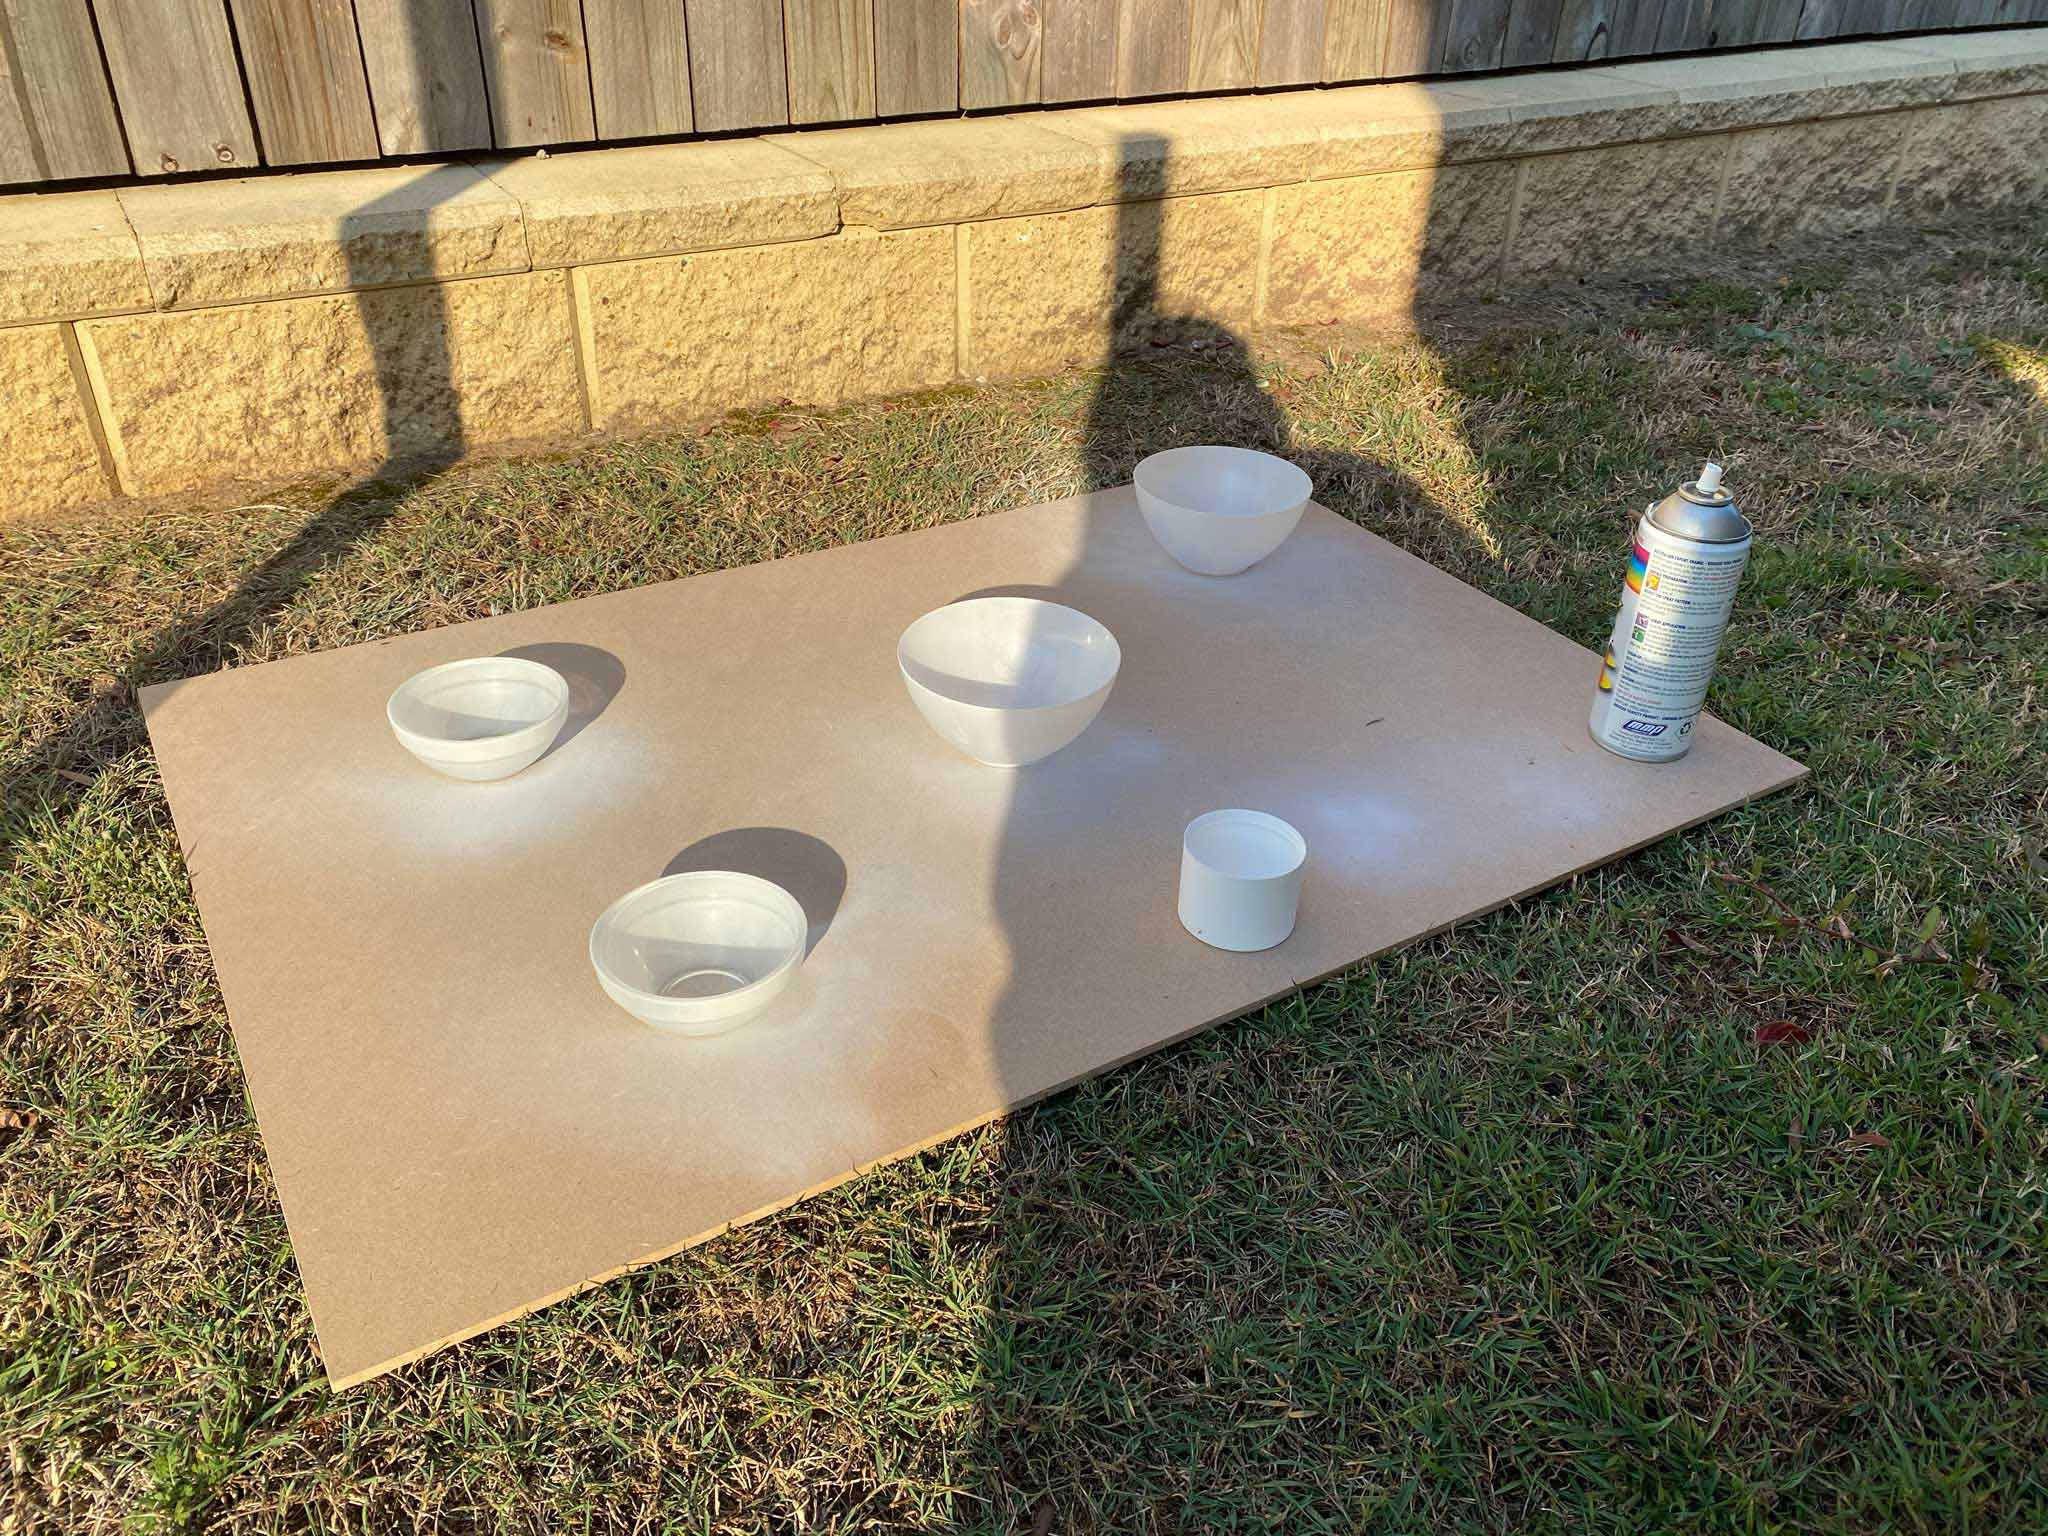 Spray Painting the Bowls